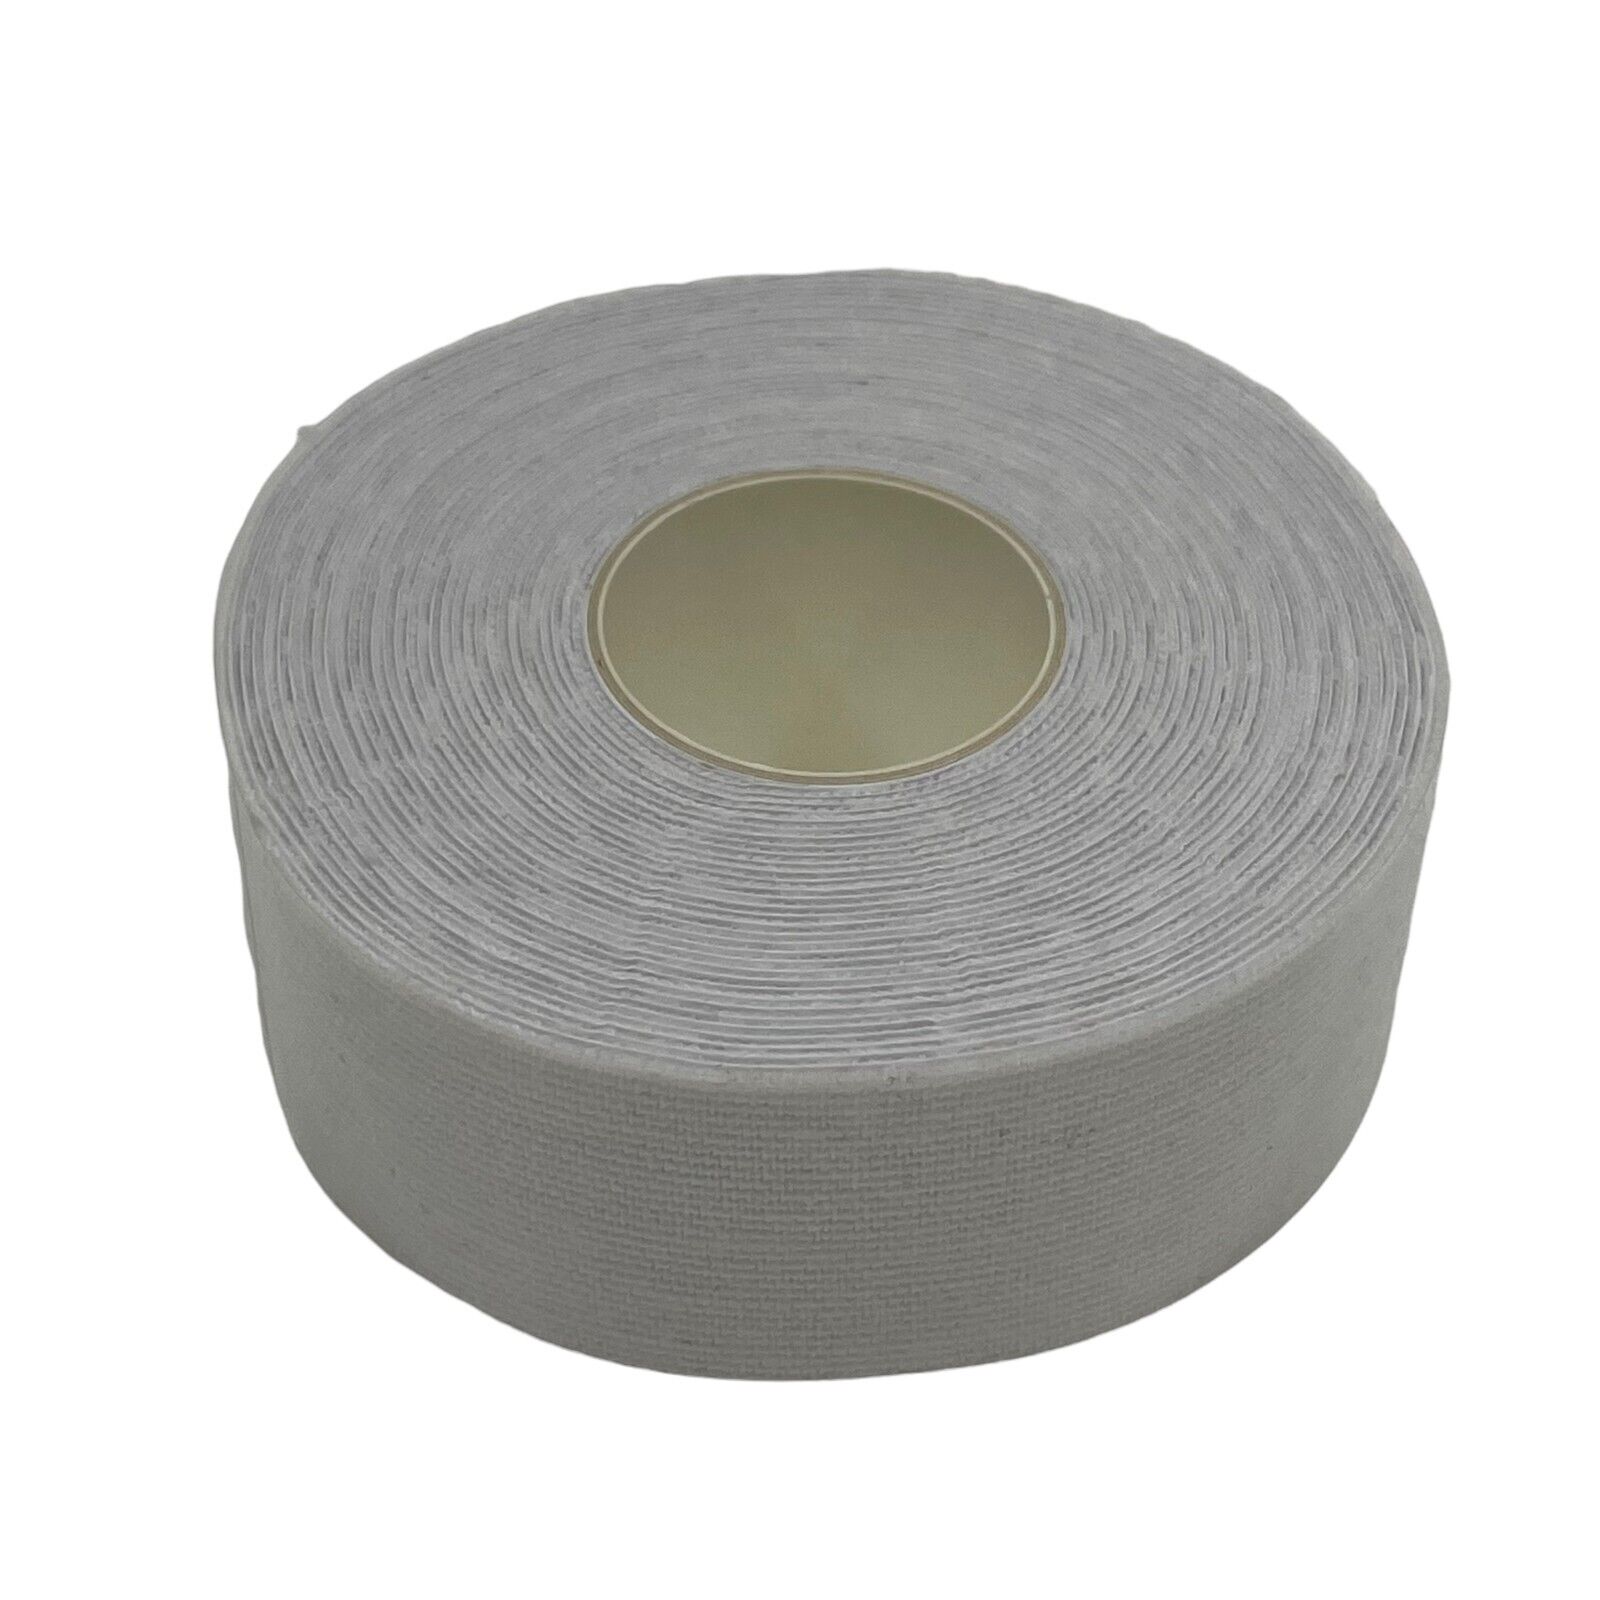 Wholesale Lot x 6 Rolls of Bowling Thumb Finger Hada Patch Protection Tape Unbranded Does Not Apply - фотография #6